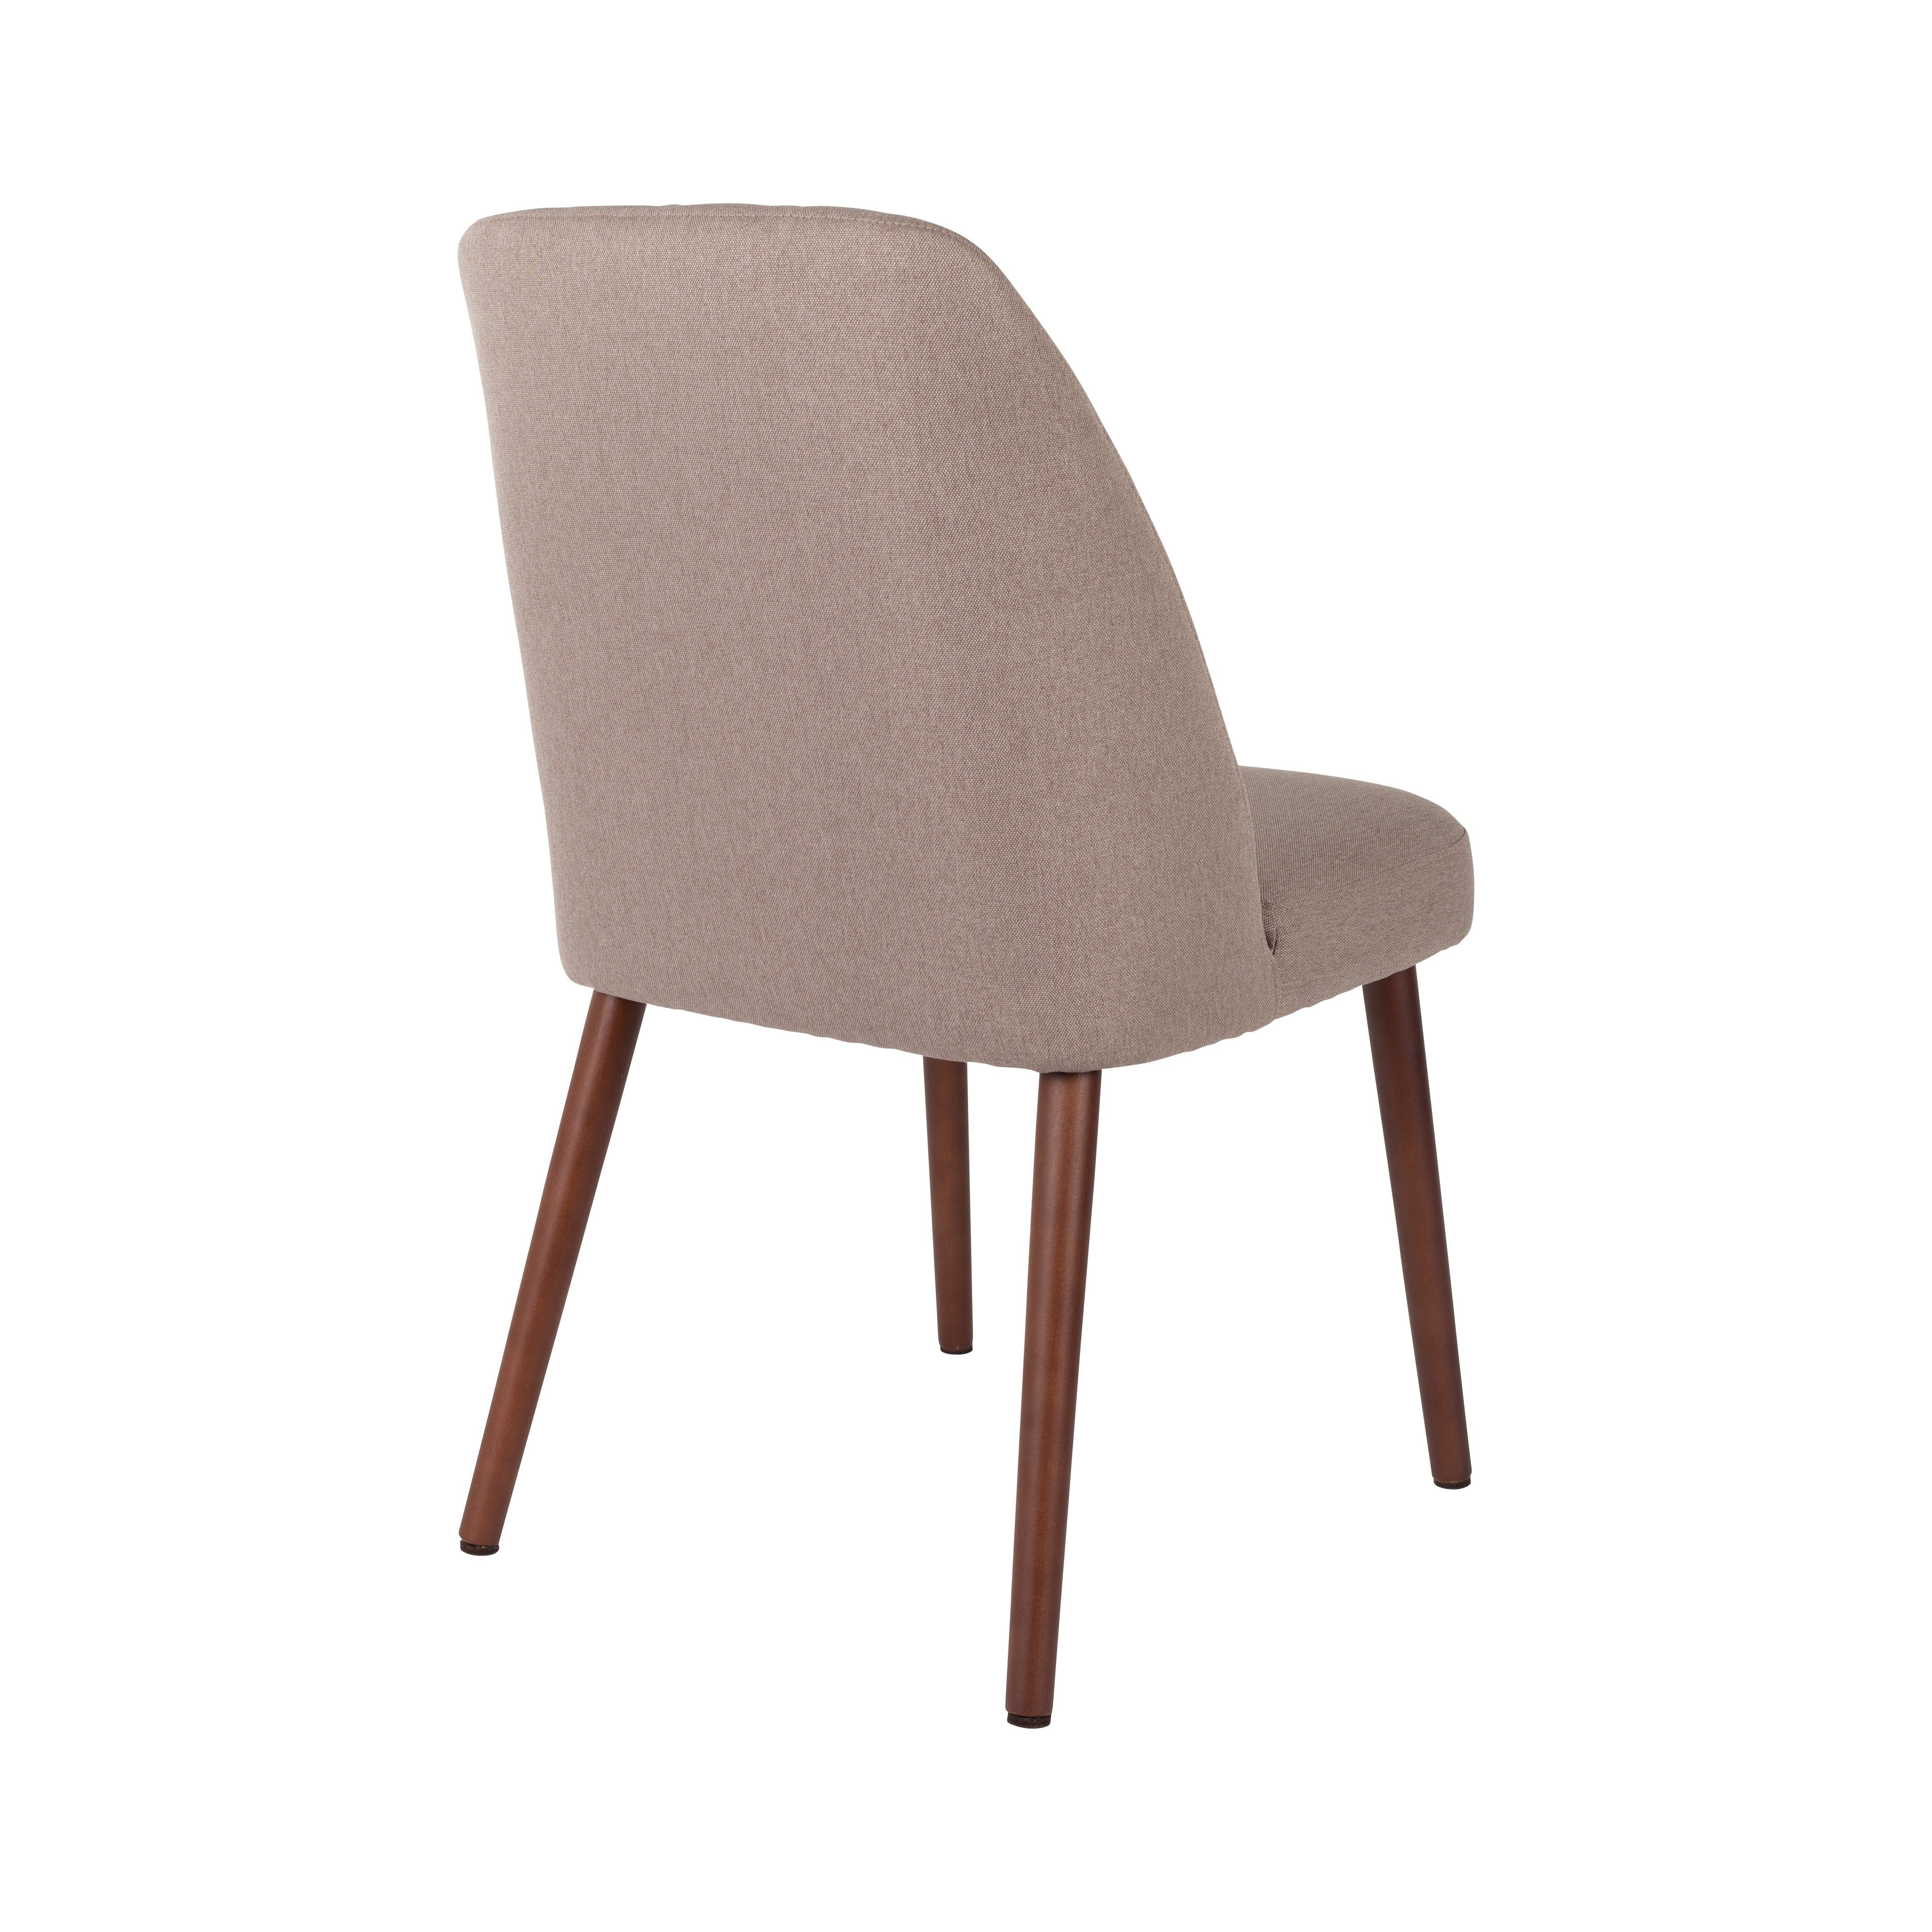 Chair conway beige